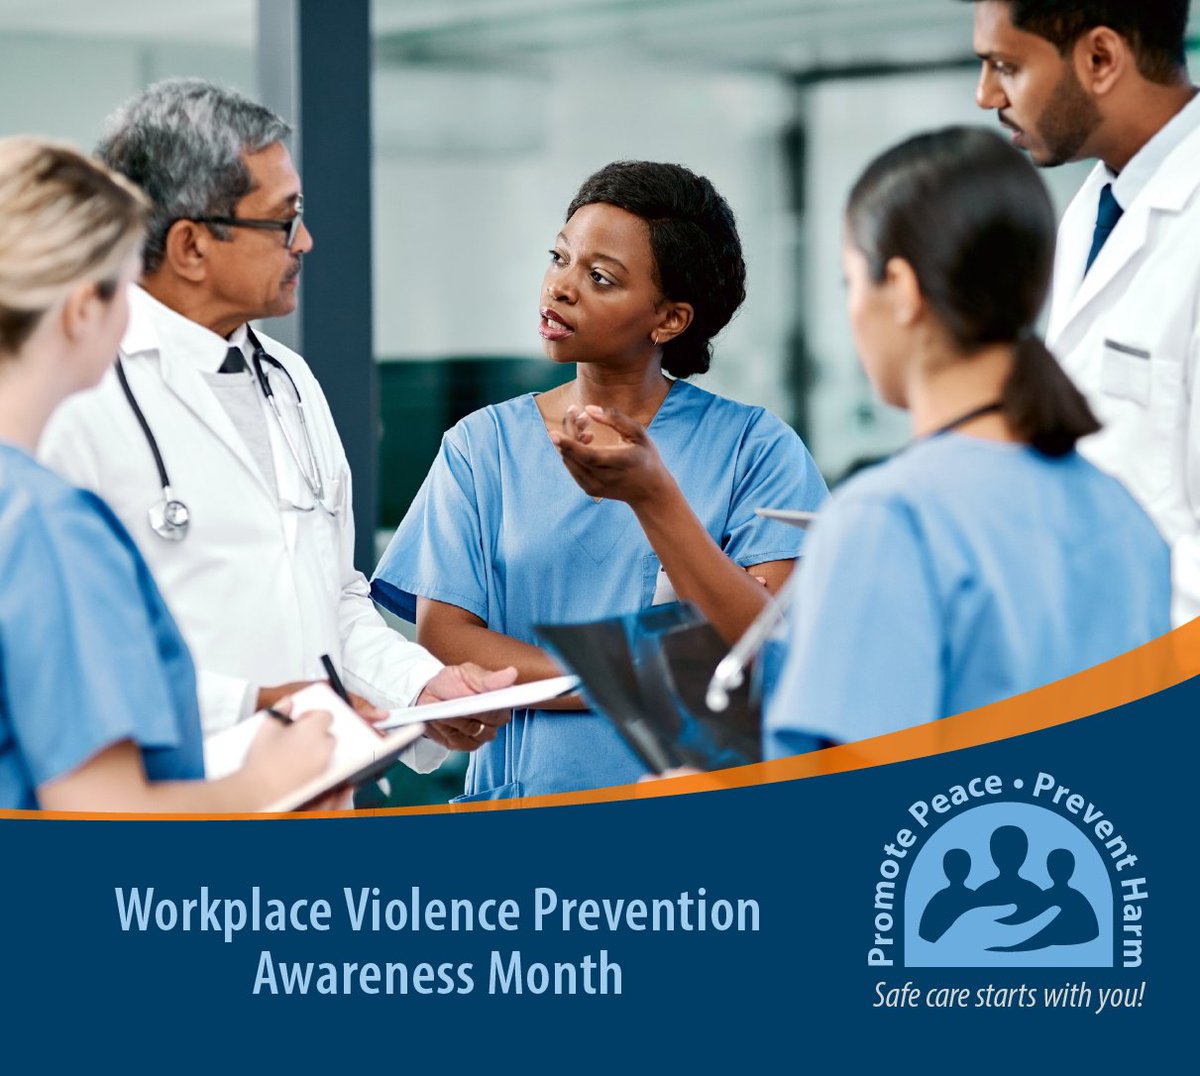 The rate of injuries from attacks against health care workers grew by 63% from 2011 to 2018, escalating during the COVID-19 pandemic, according to the Bureau of Labor Statistics. View @TJCommission prevention resources tmfnetworks.org/link?u=b2a9fb #WorkplaceViolencePrevention